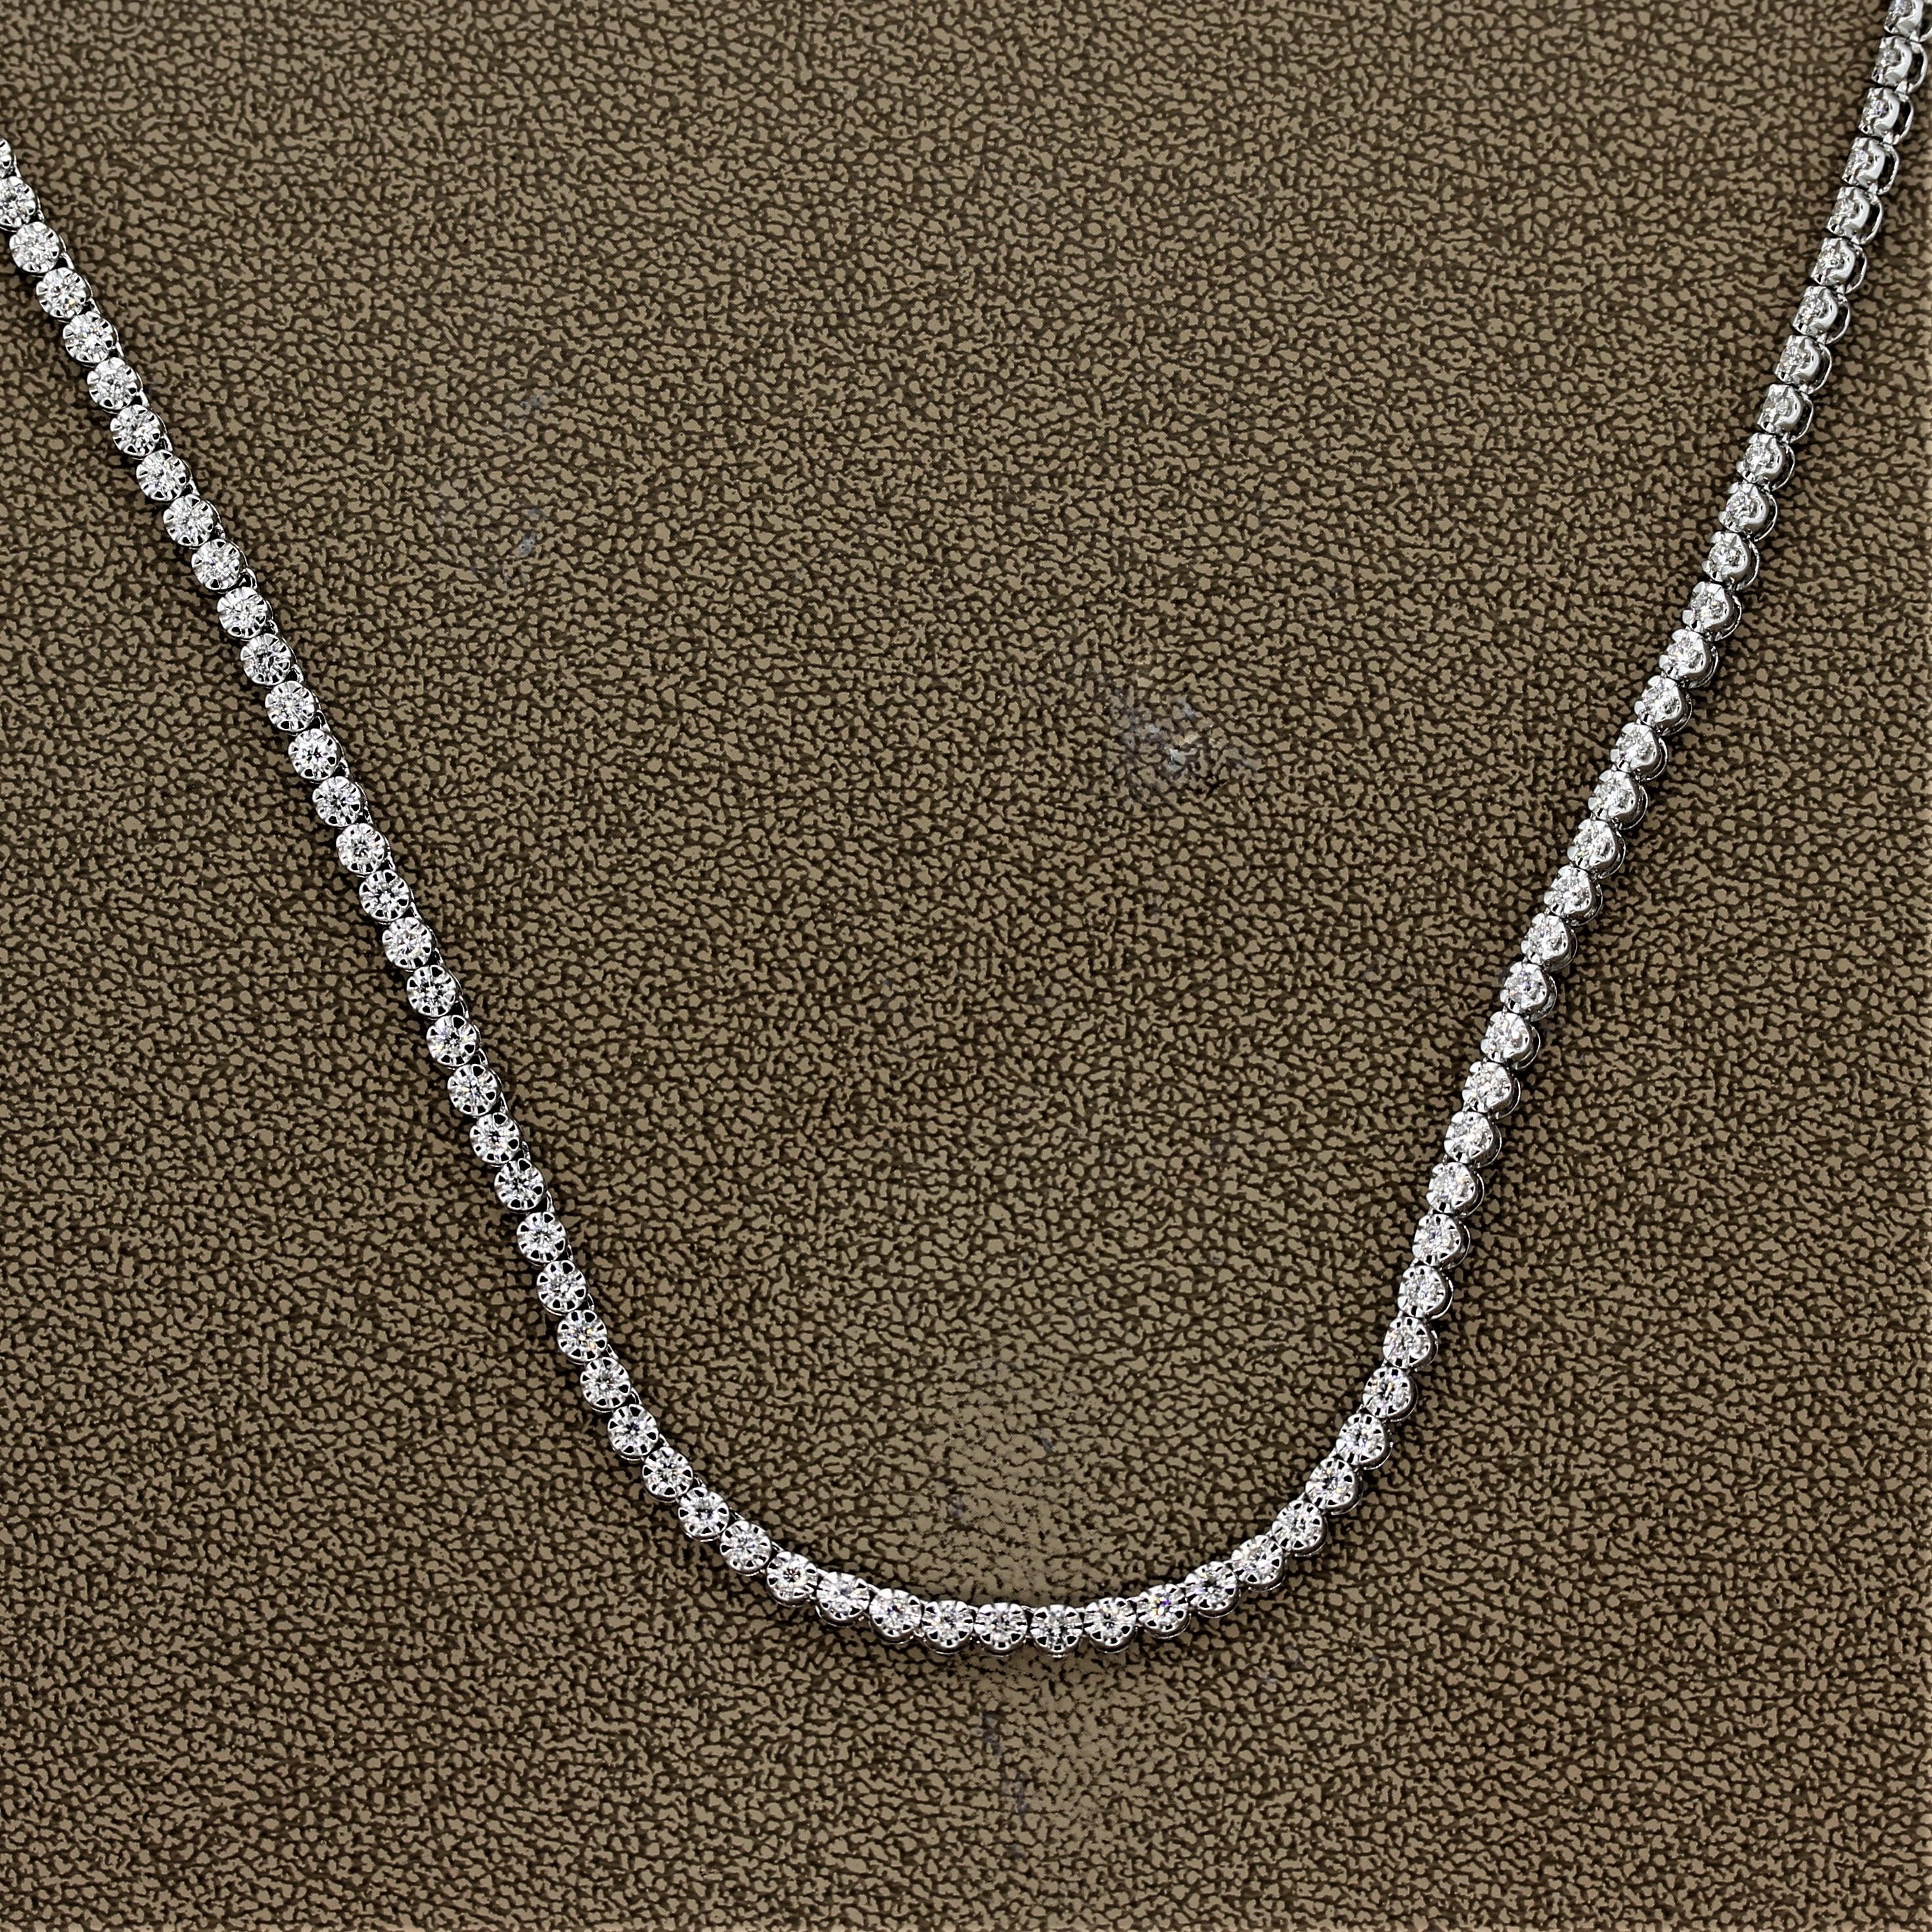 A simple yet timeless tennis necklace featuring 7.63 carats of round brilliant cut diamonds. Made in 14k white gold with a safety clasp ensuring a secure closure.

Length: 24 inches